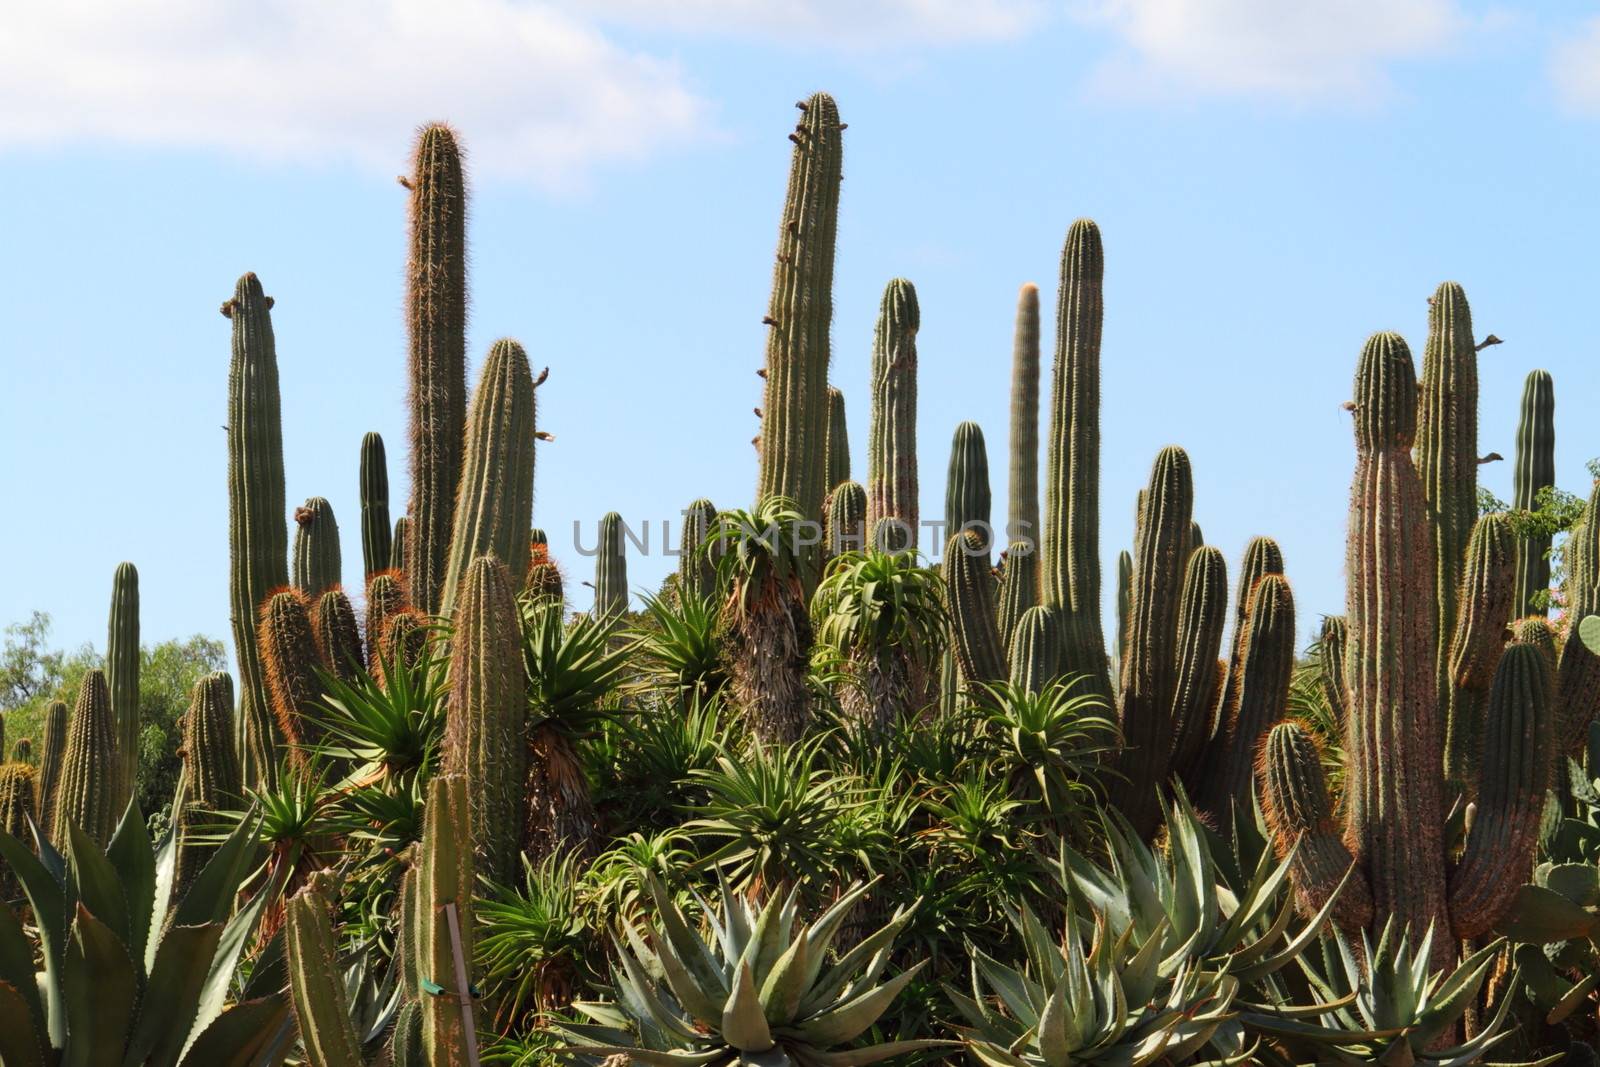 Cacti at Bontanicactus,Ses Selines, Mallorca, Spain by mitzy